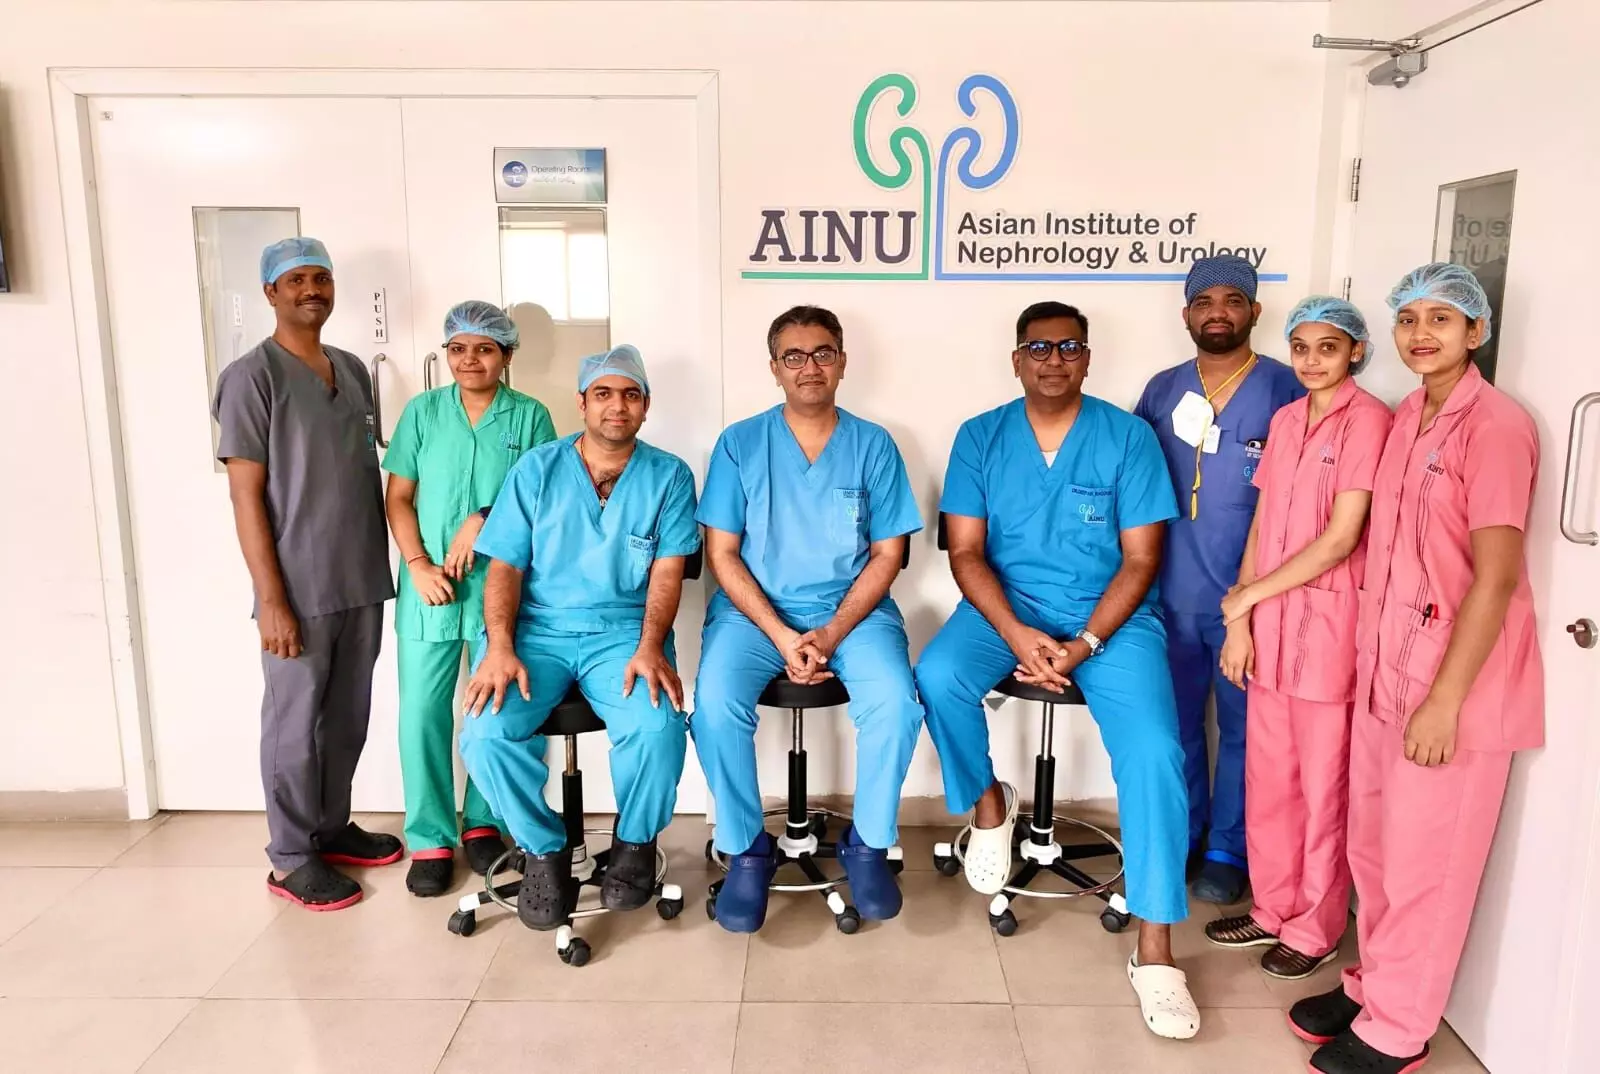 Three in Hyderabad family successfully treated for Kidney Stones at AINU